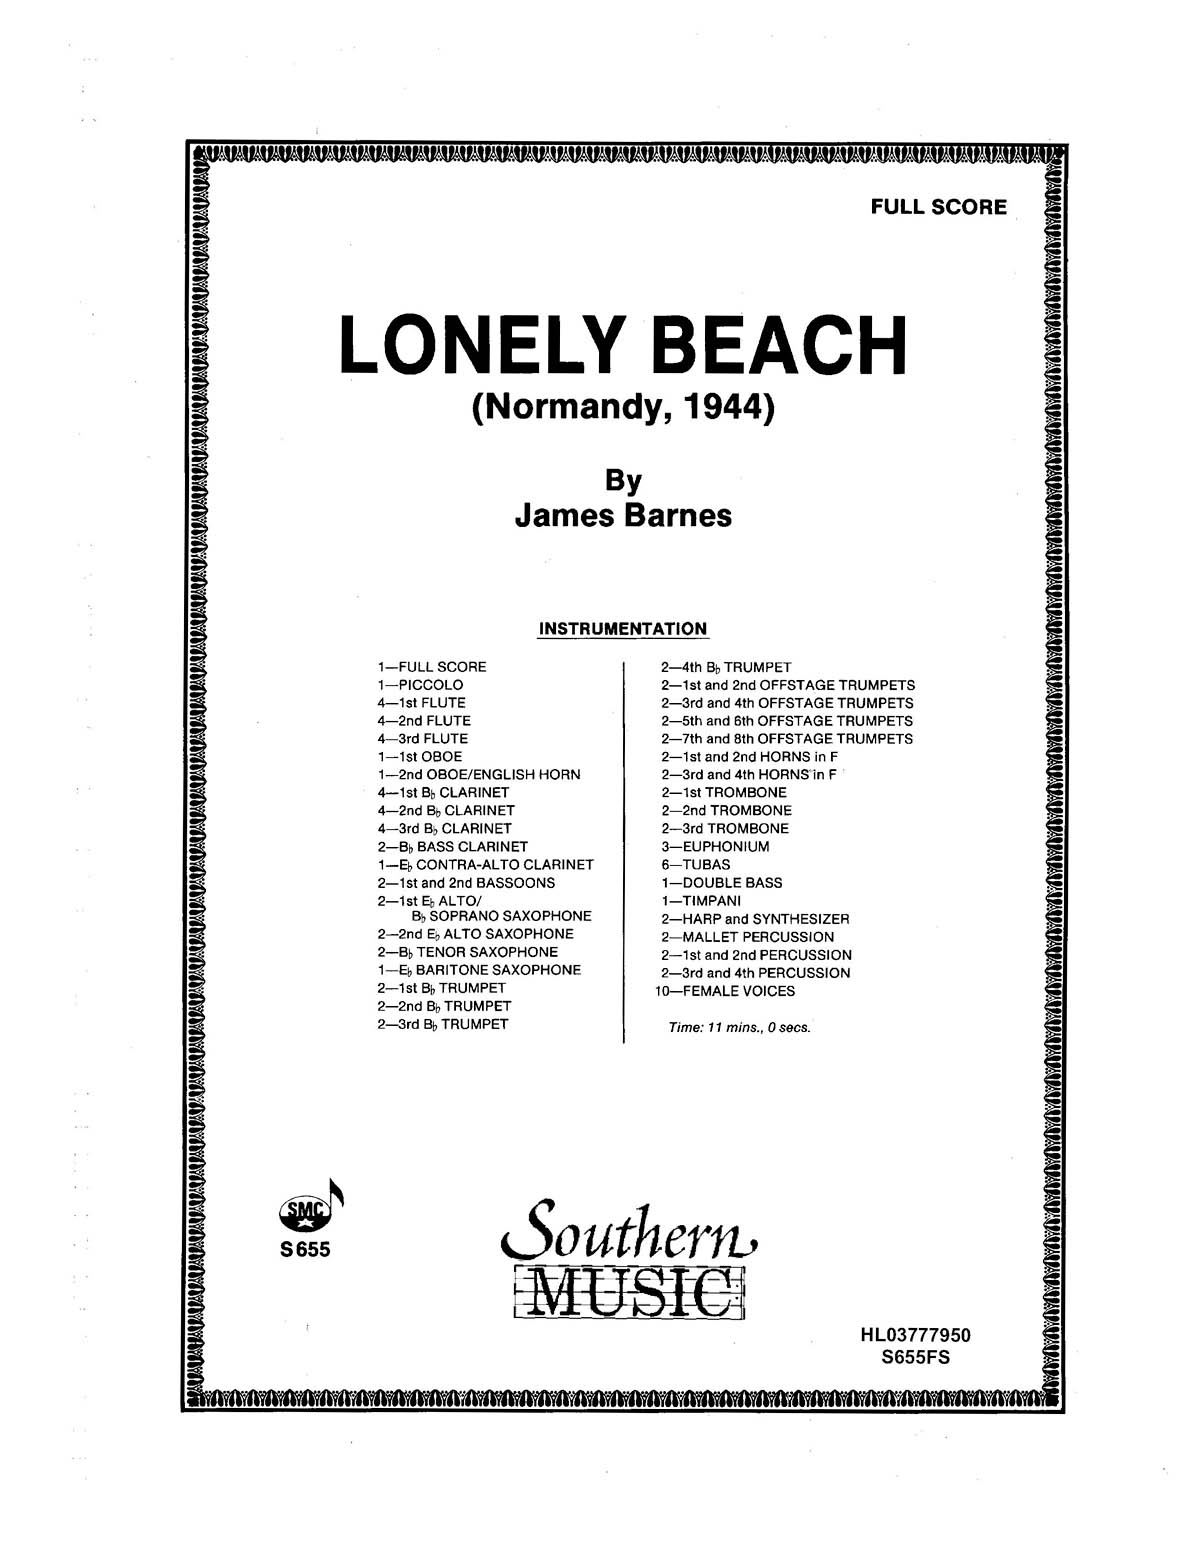 James Barnes: Lonely Beach (Normandy 1944): Concert Band: Score